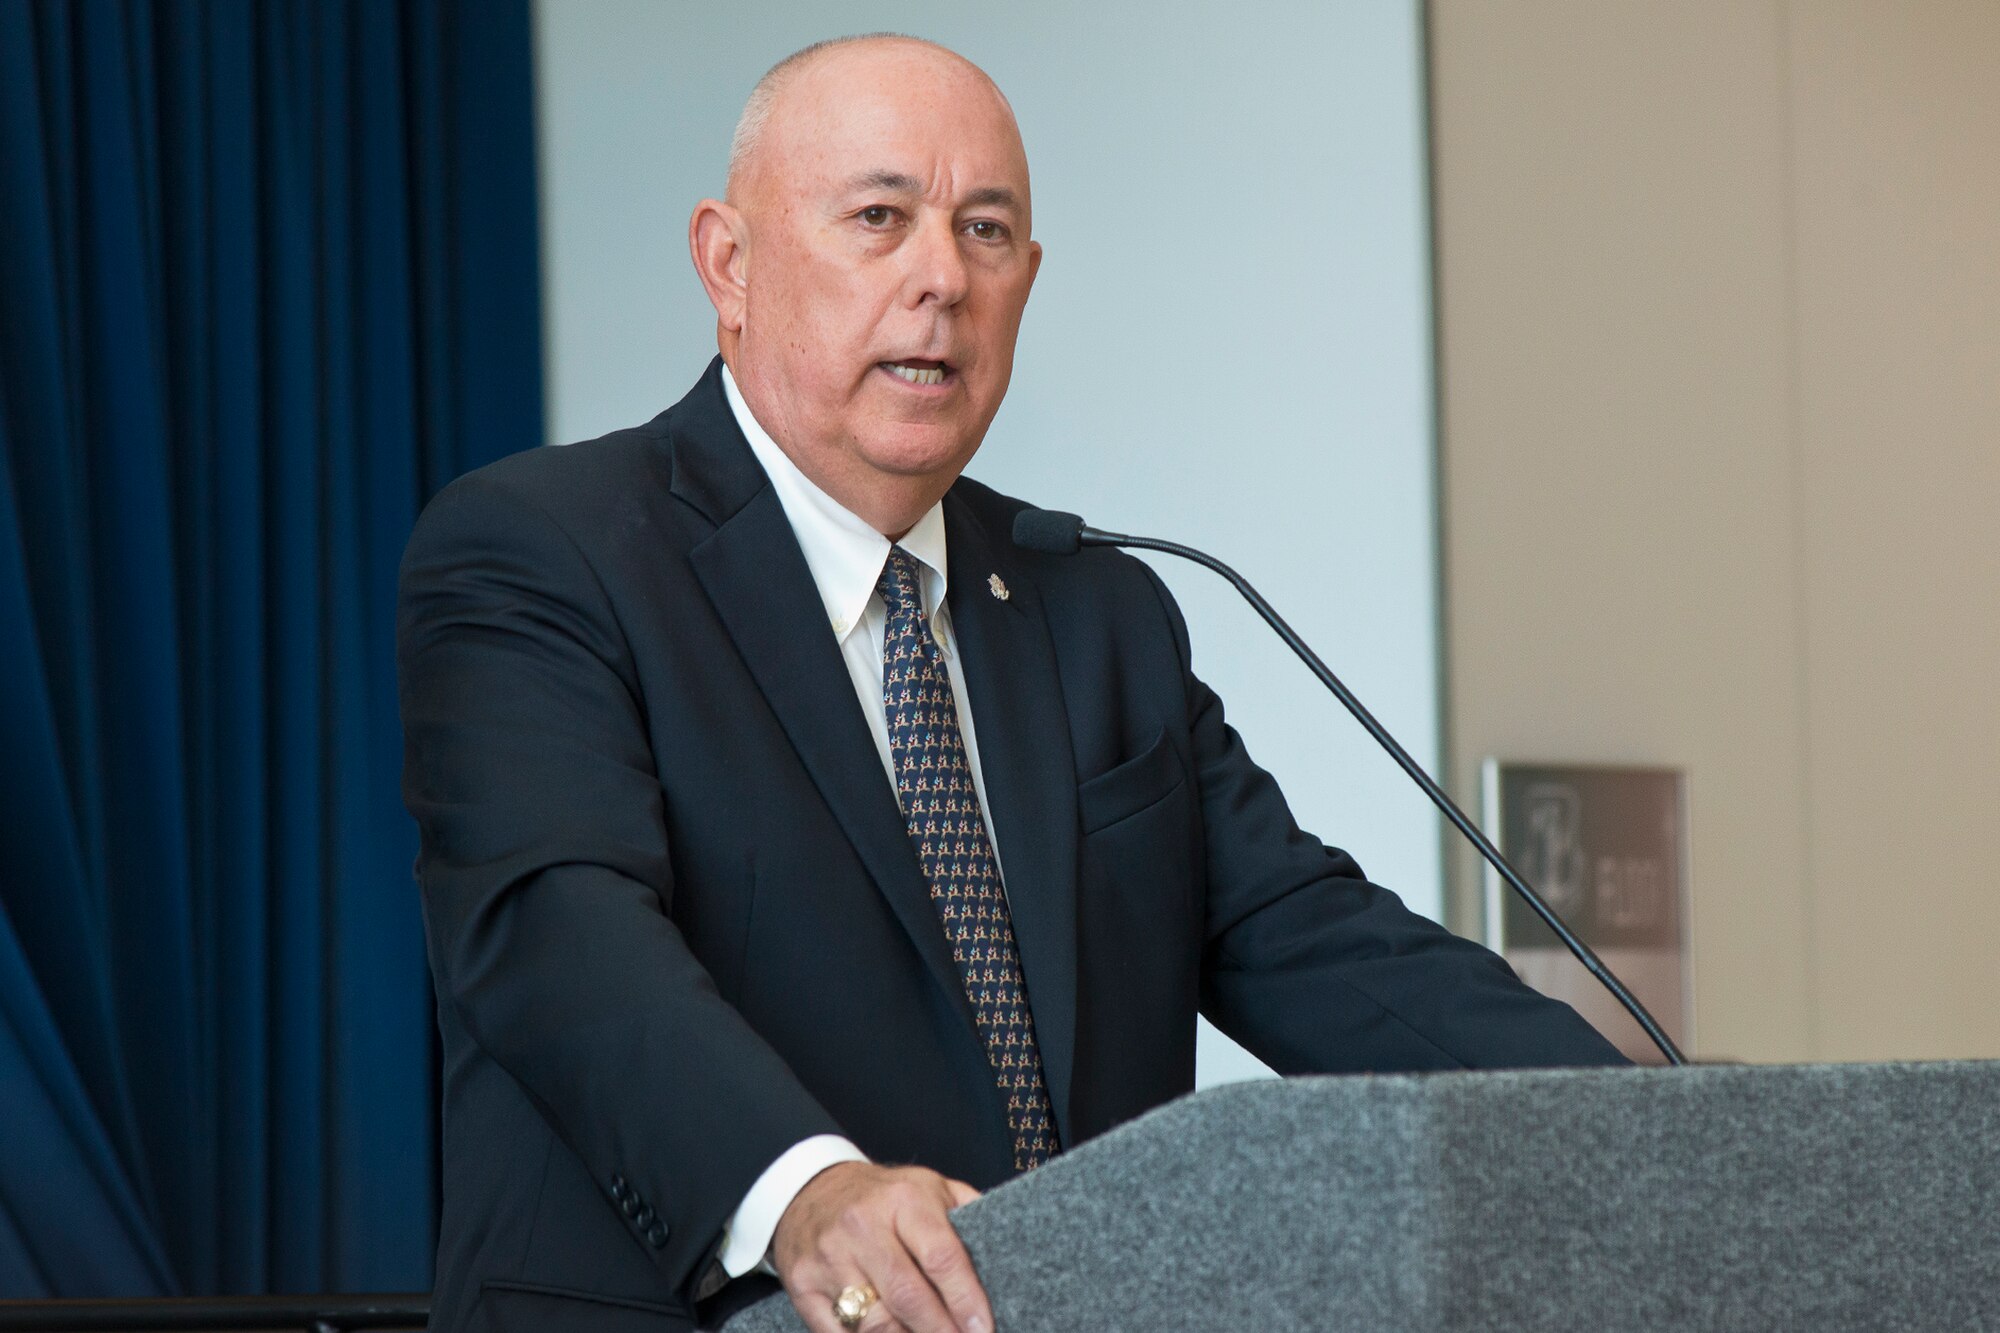 Former Air Force Chief of Staff Gen. T. Michael Moseley speaks to attendees during the retirement ceremony of Lt. Gen. Stanley E. Clarke III at the Air National Guard Readiness Center, Joint Base Andrews, Md., December 18. 2015. Clarke is the 15th director of the ANG and retired after 34 years of service. (Air National Guard photo by Master Sgt. Marvin R. Preston/Released